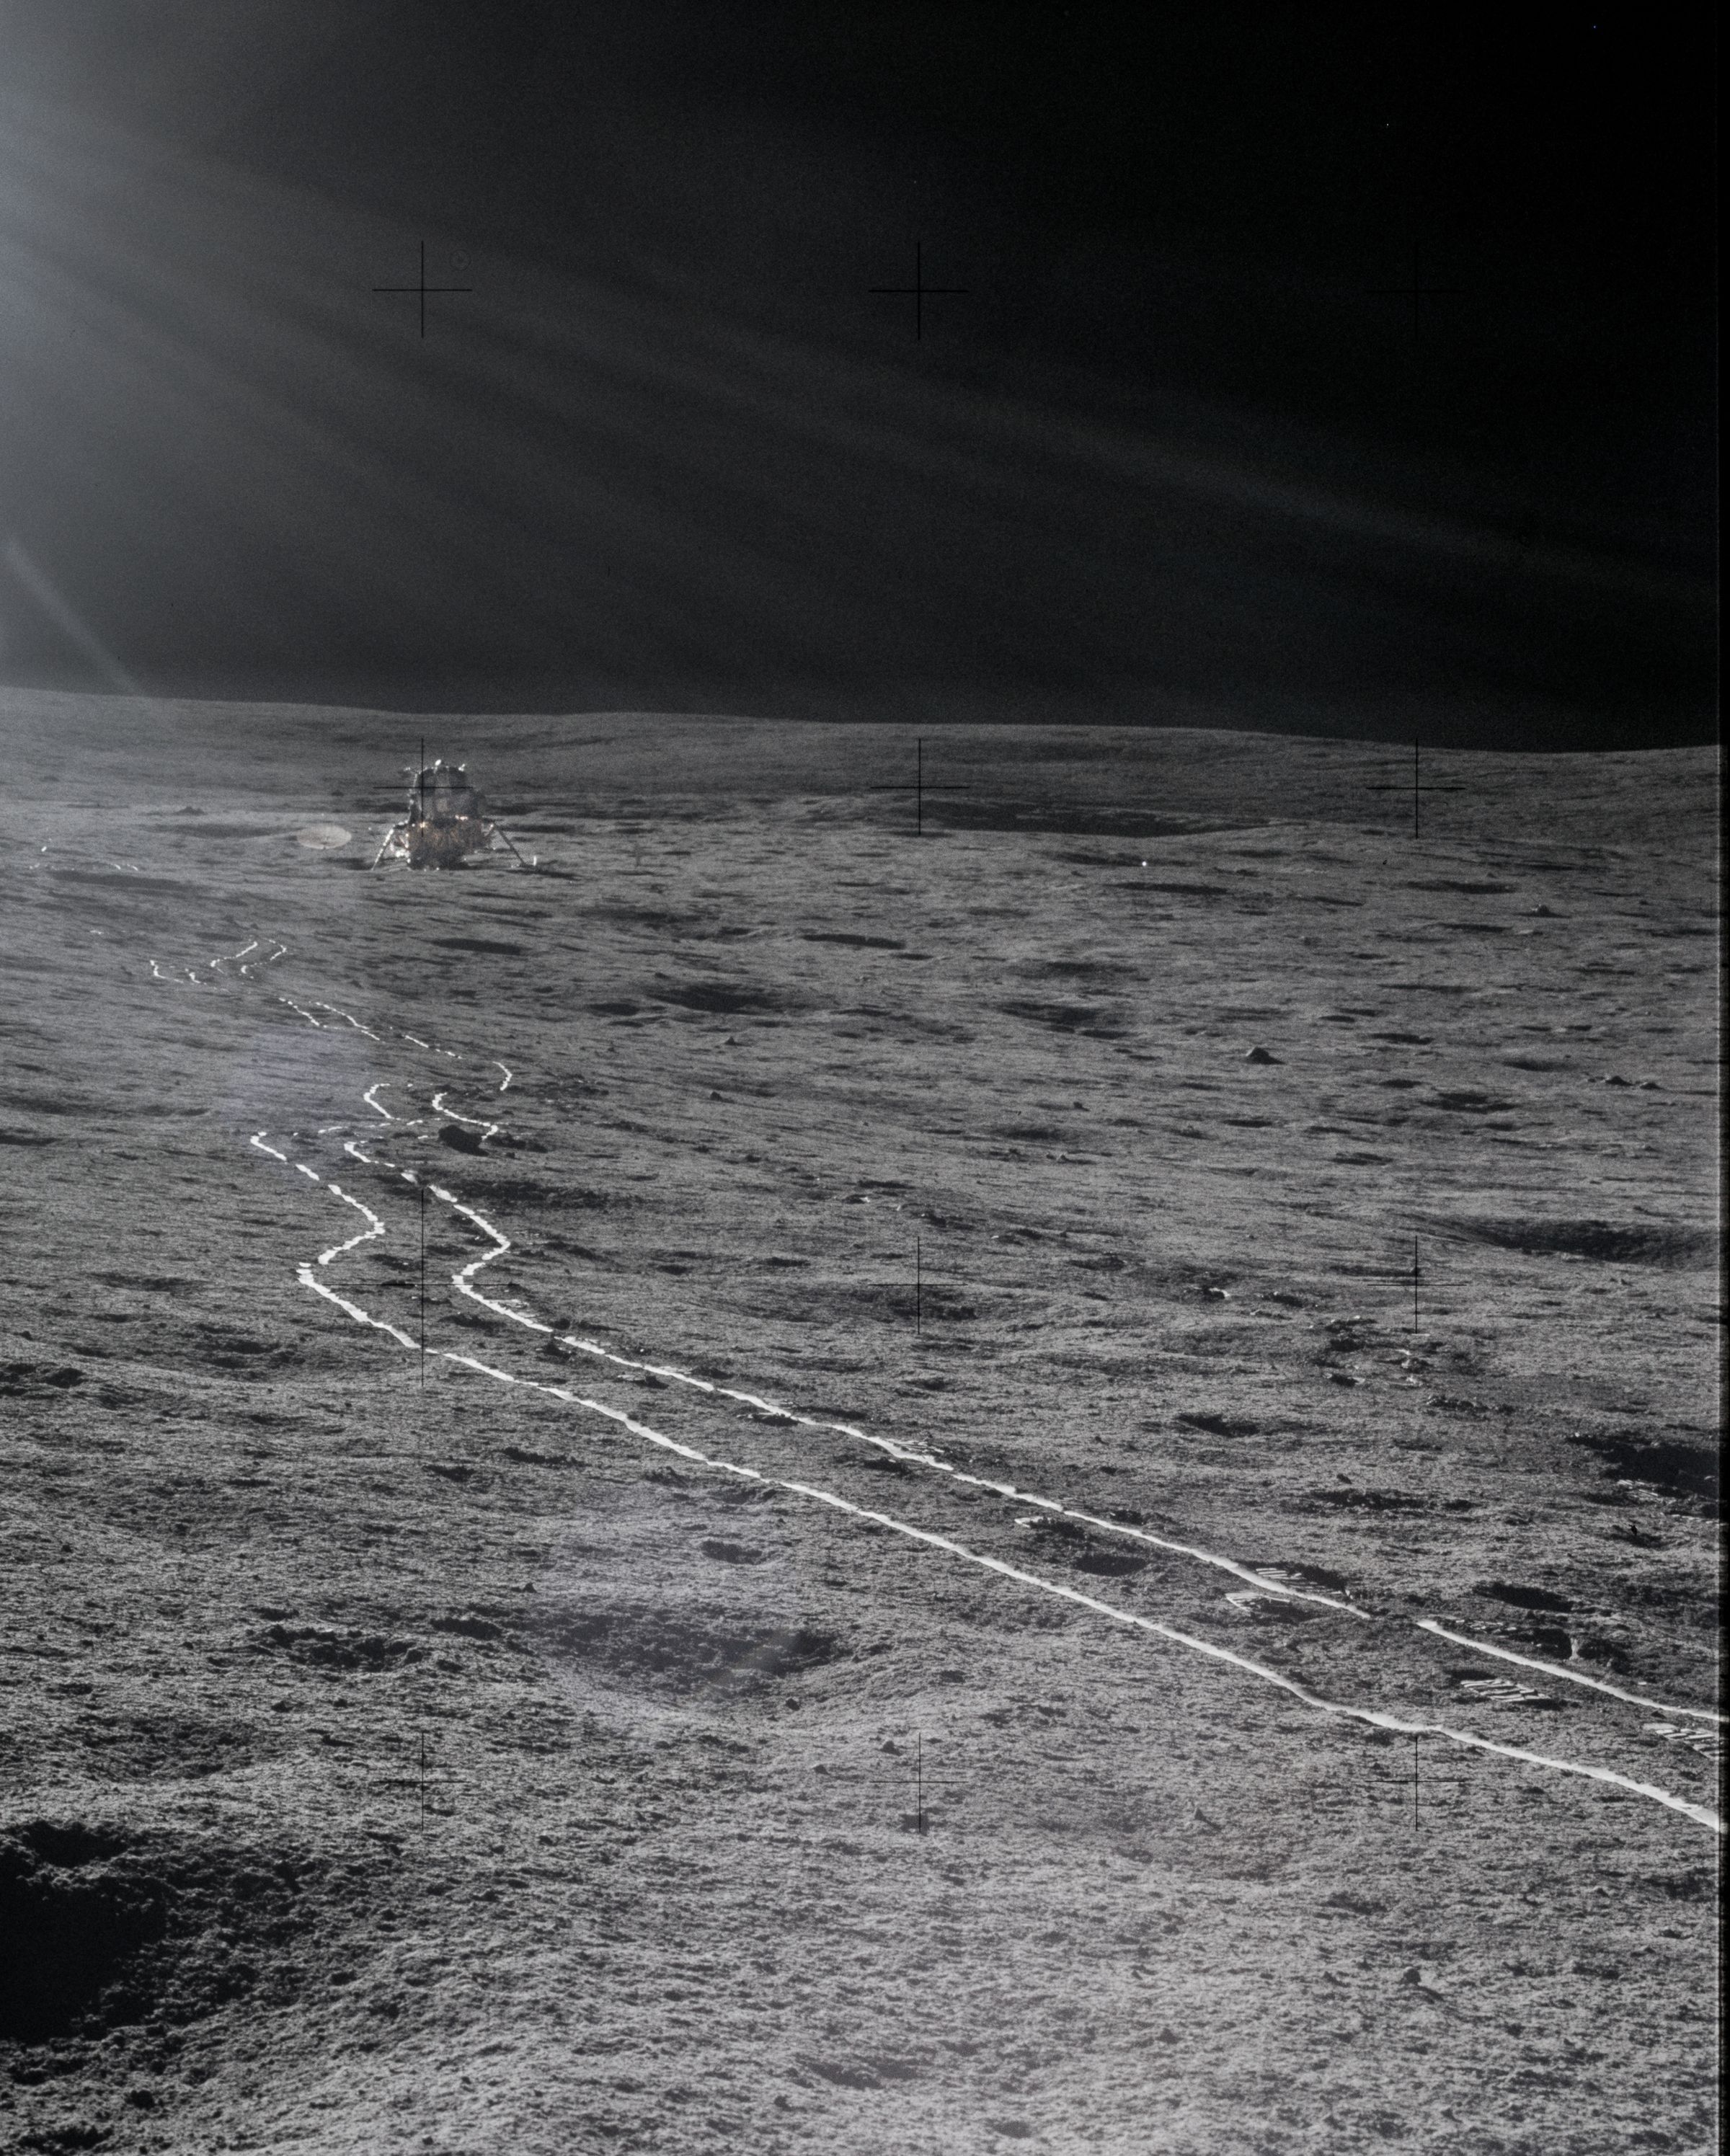 A picture of the lunar surface taken during Apollo 14.